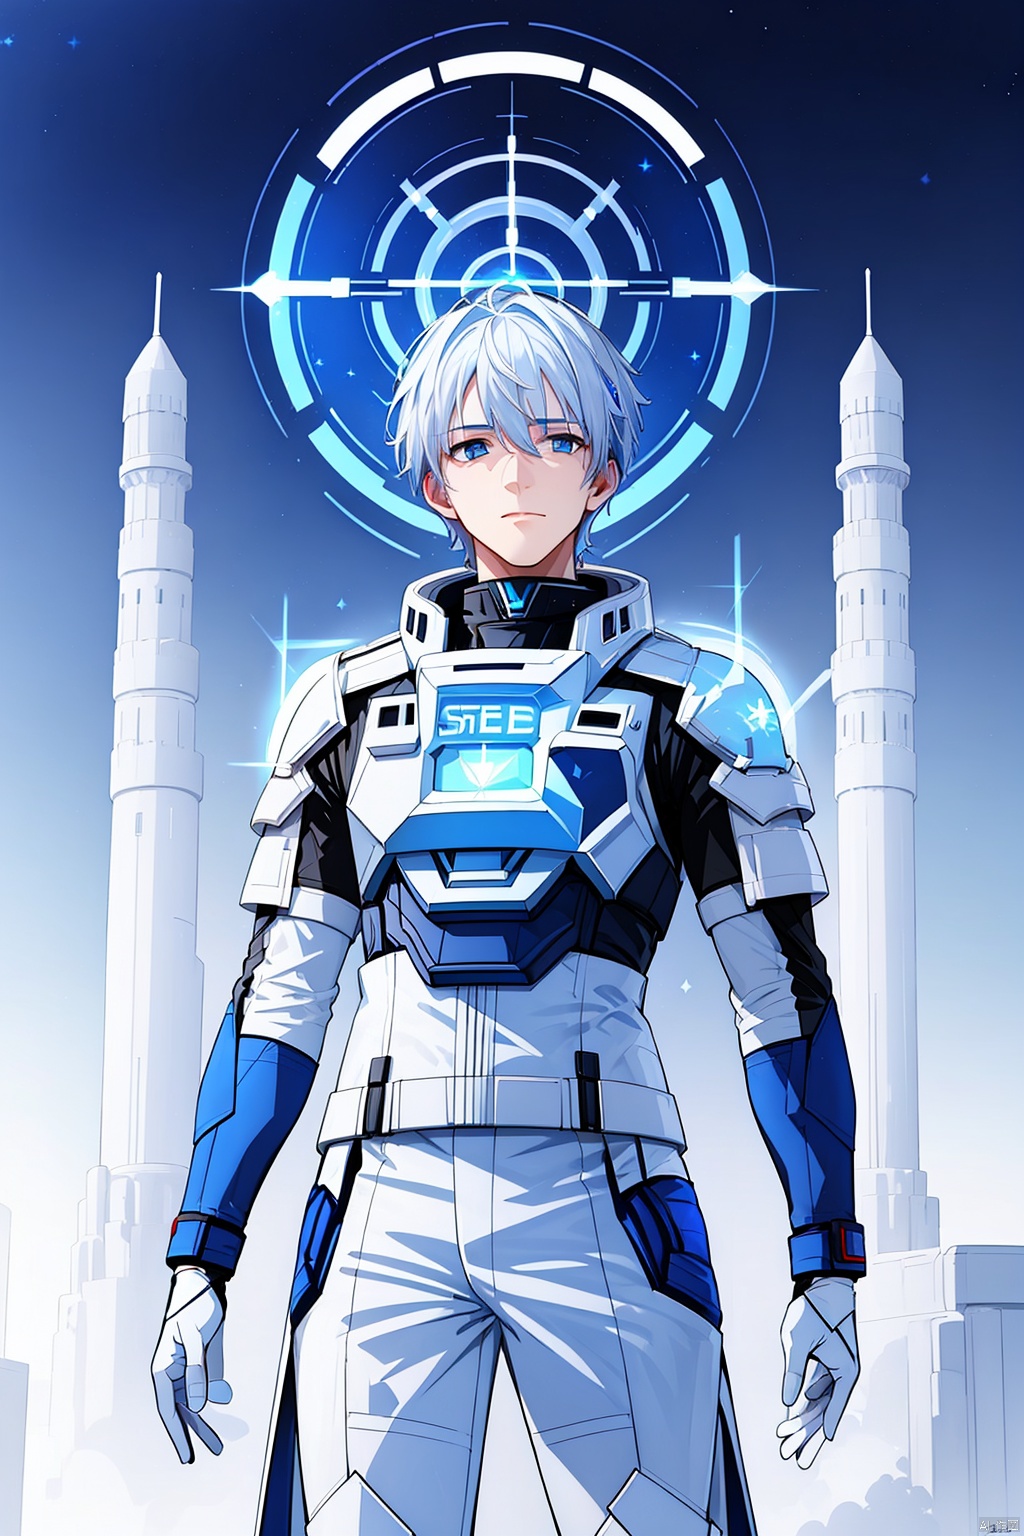  1 boy, blue eyes, white hair, red space suit, (bust: 1.3), dynamic pose, HD, 32k, (Masterpiece: 1.5), 